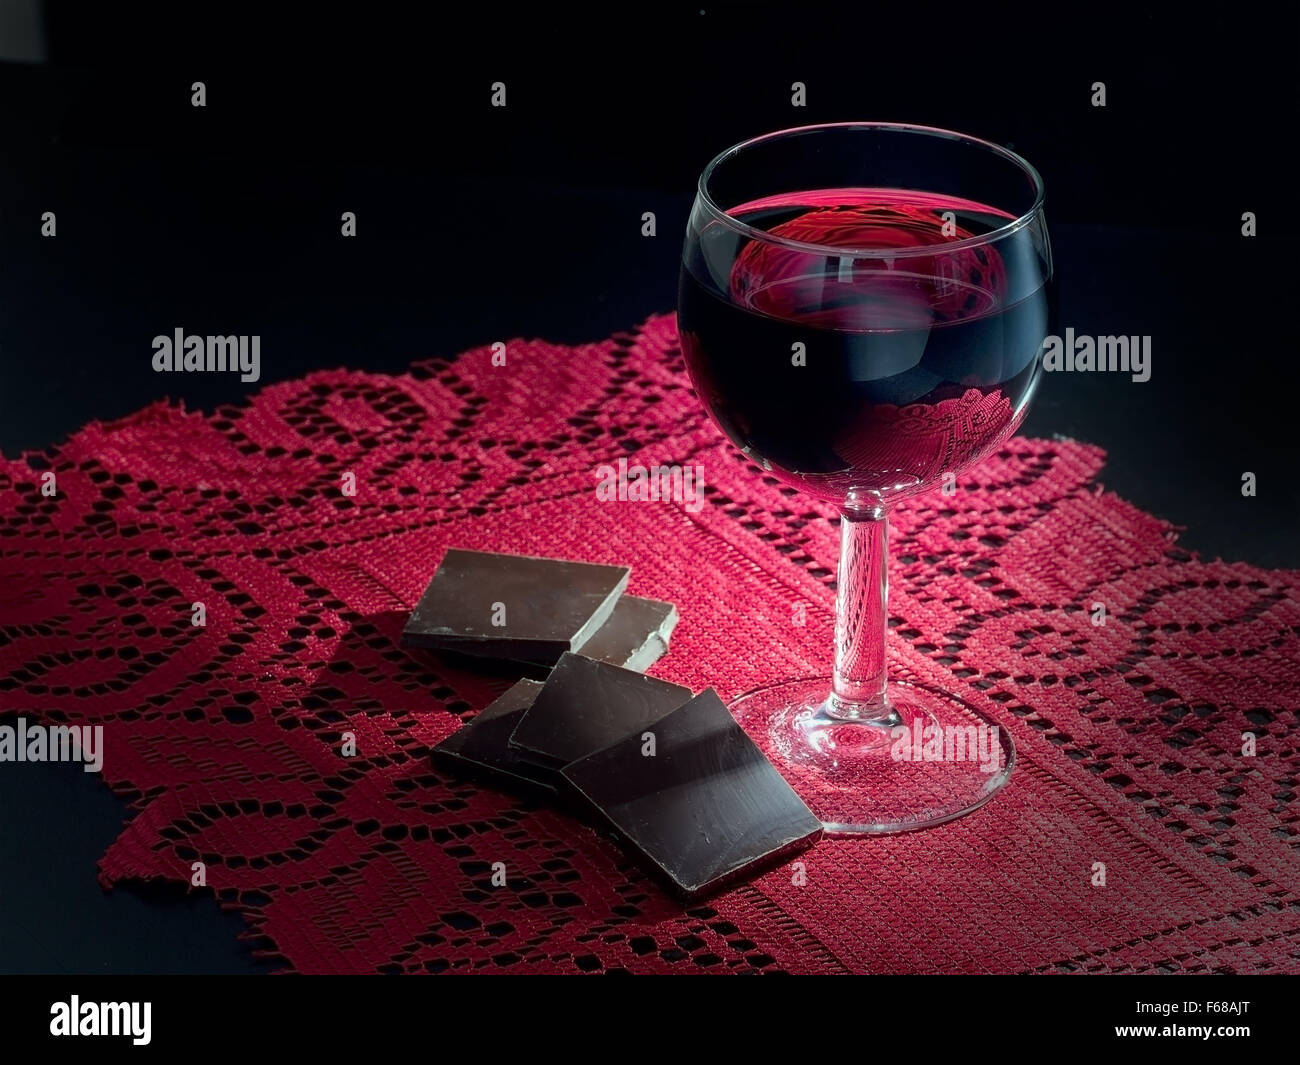 Healthy heart? Dark chocolate and red wine on red lace doily Stock Photo